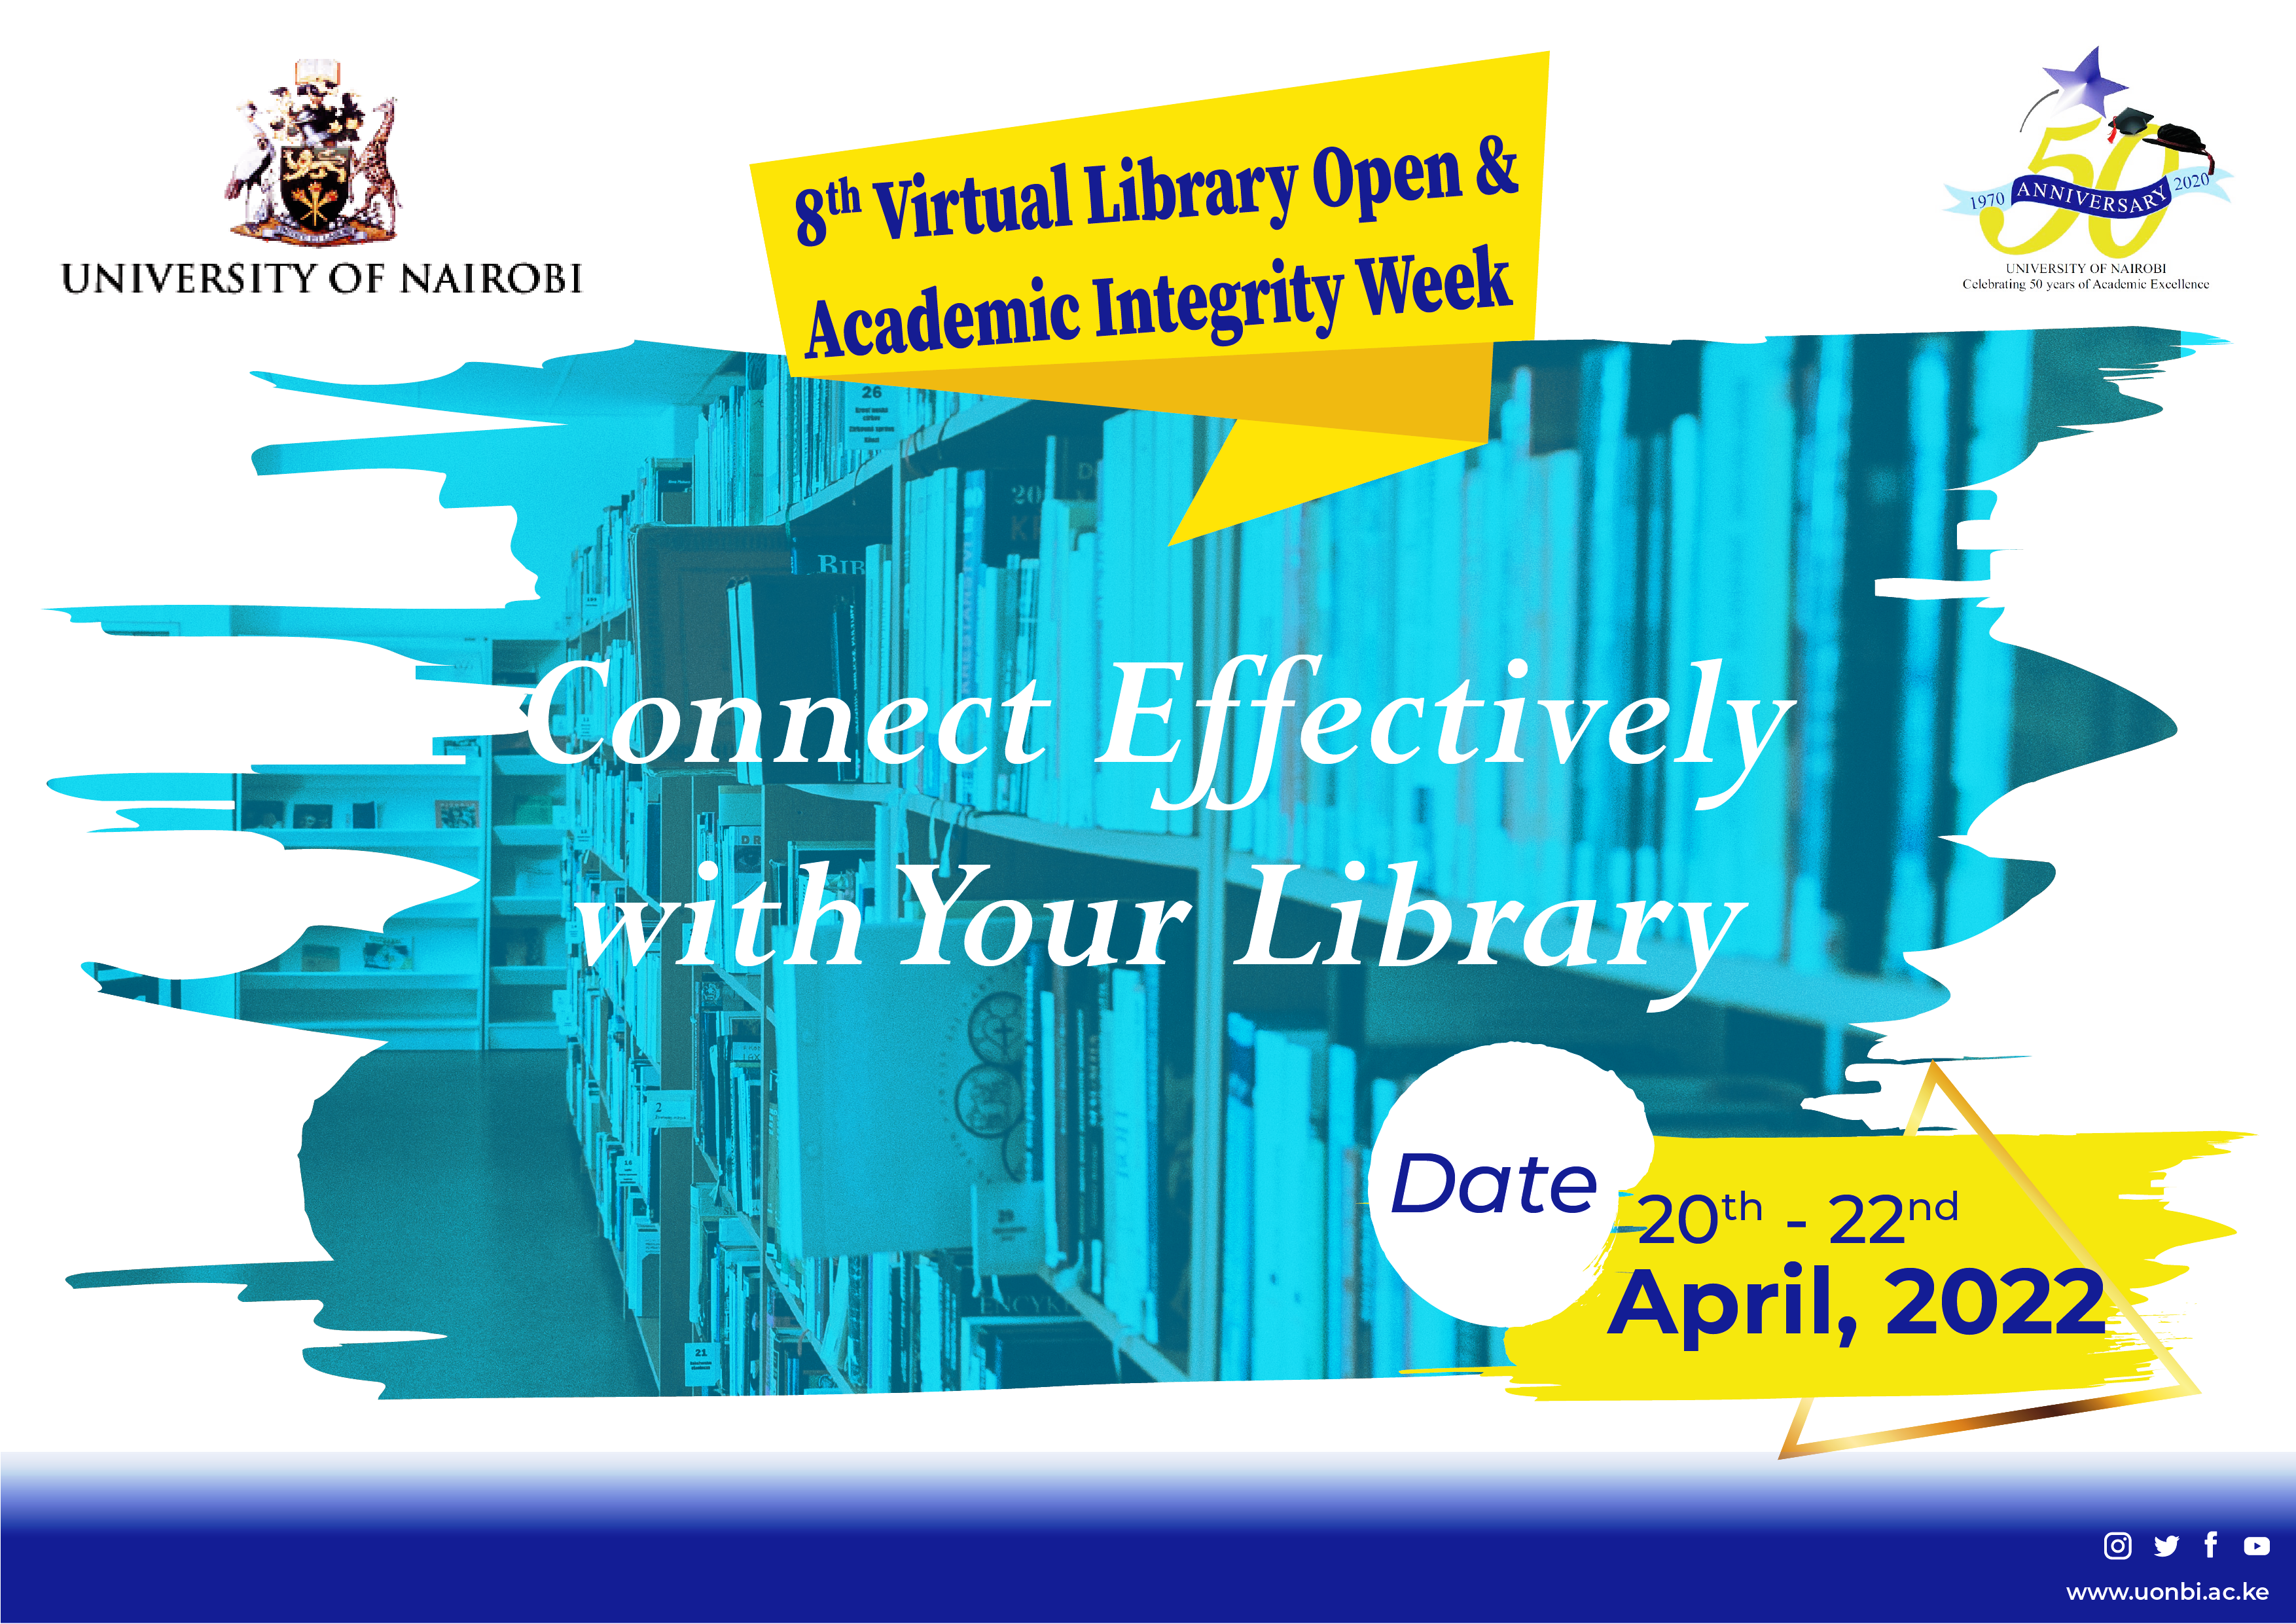  Library Open Day & Academic Integrity Event